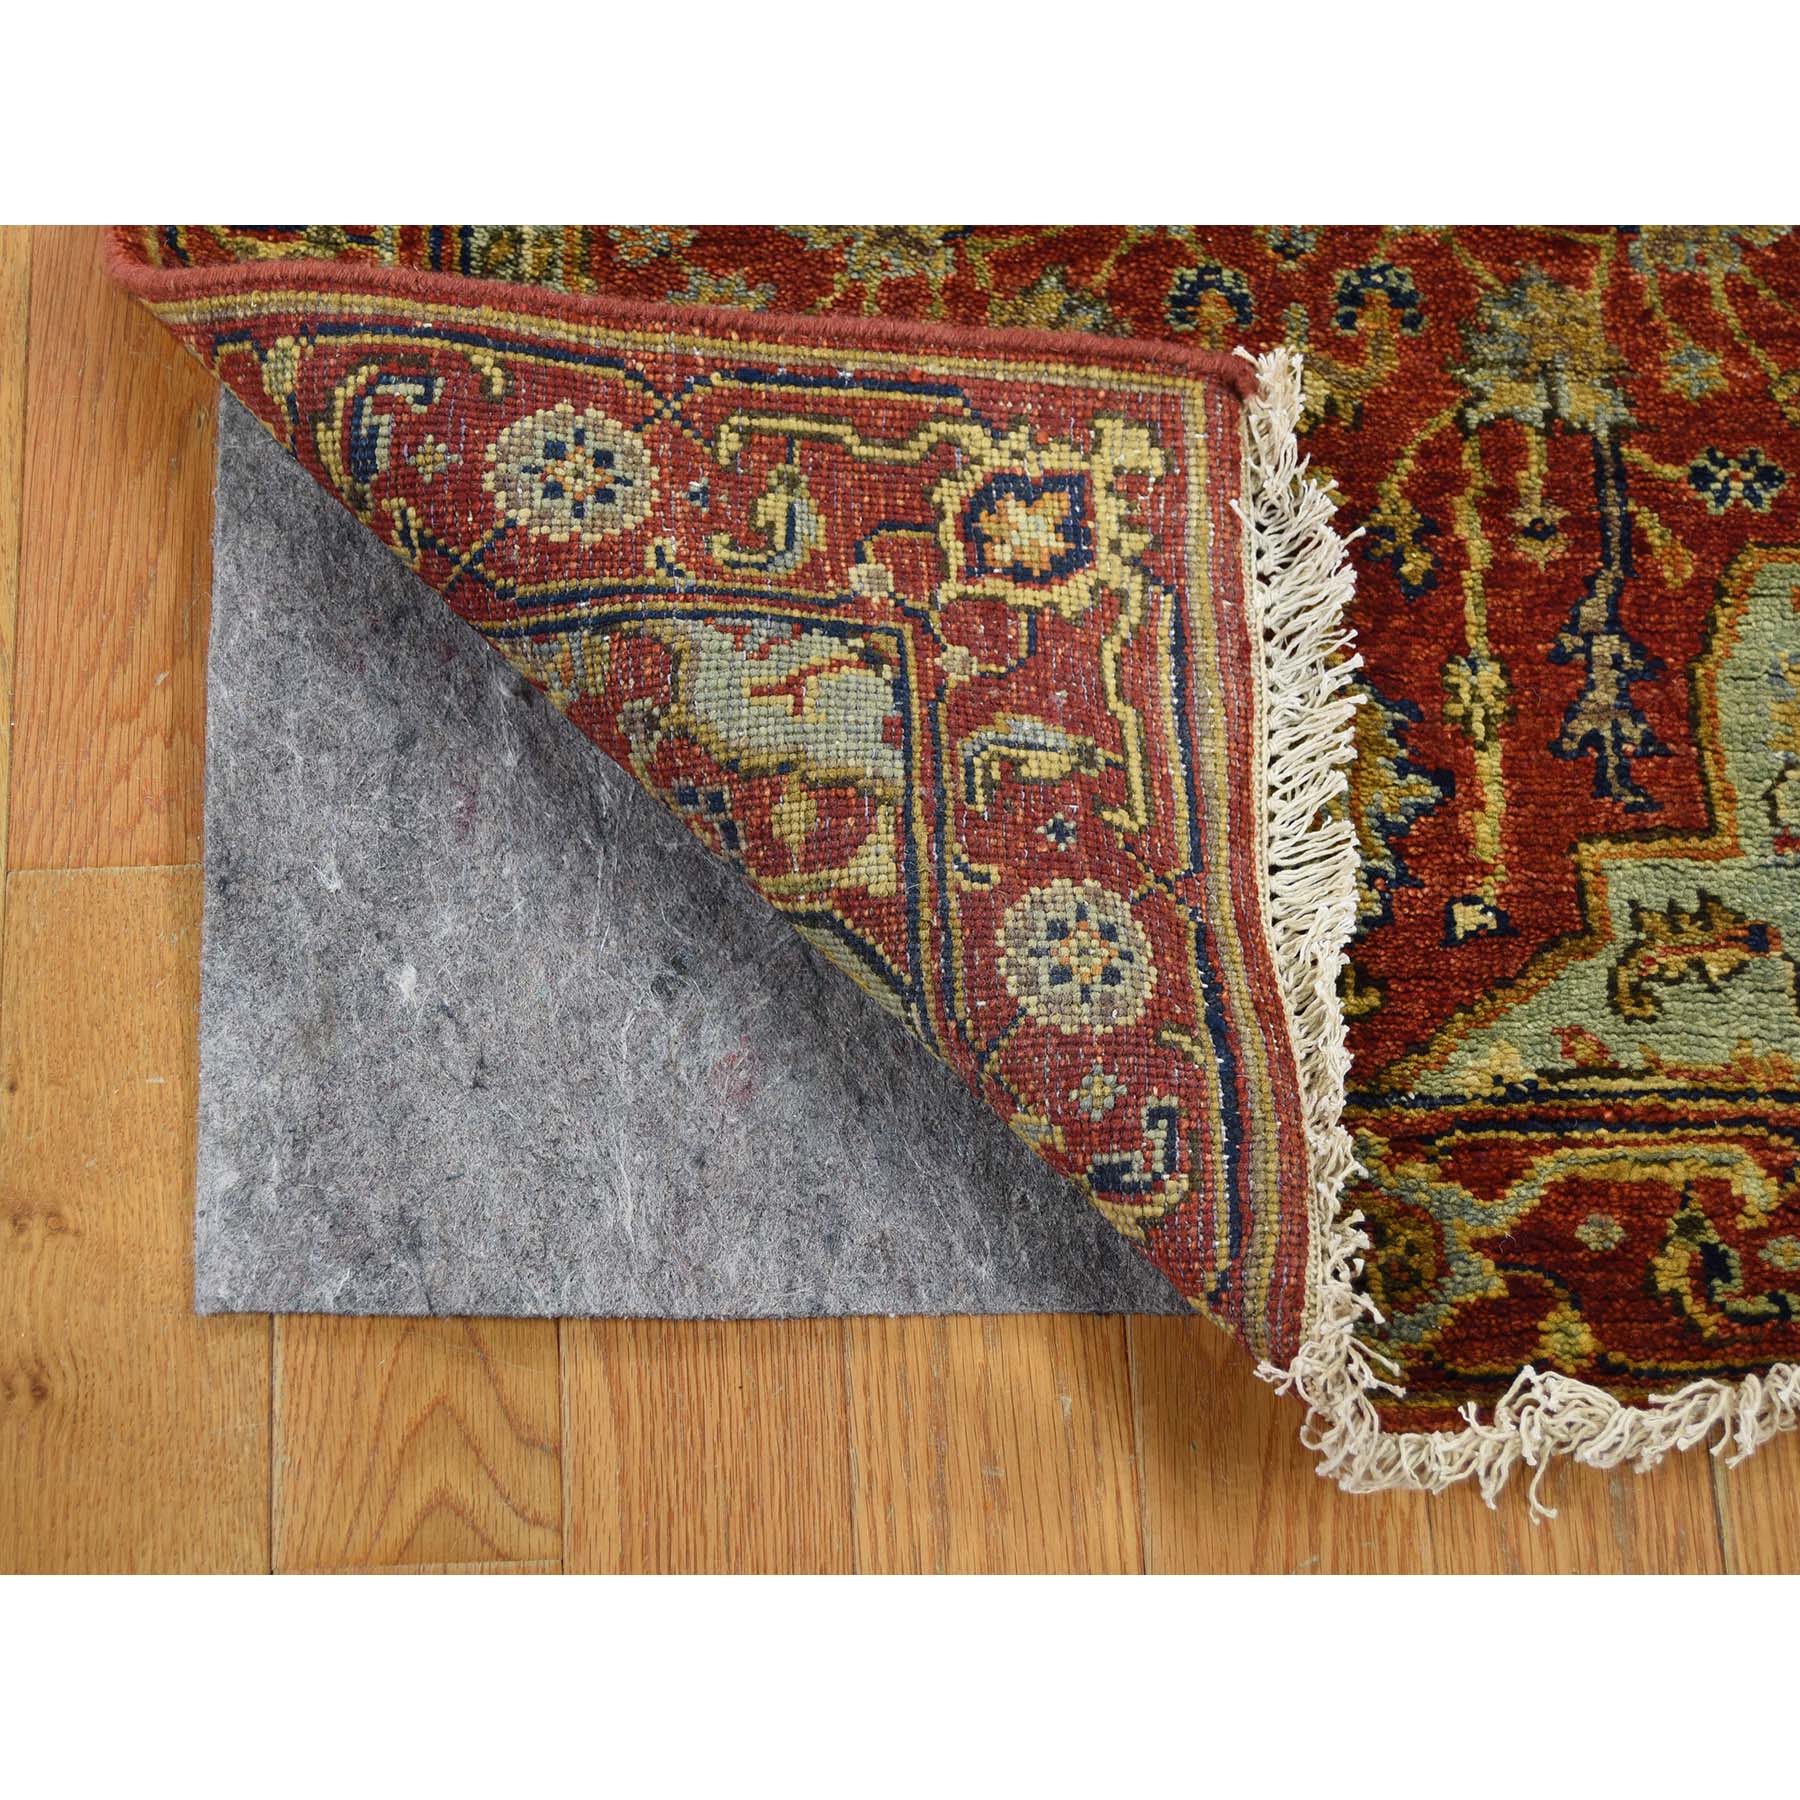 2-7 x17-7  Antiqued Heriz Re-Creation Pure Wool XL Runner Hand-Knotted Oriental Rug 